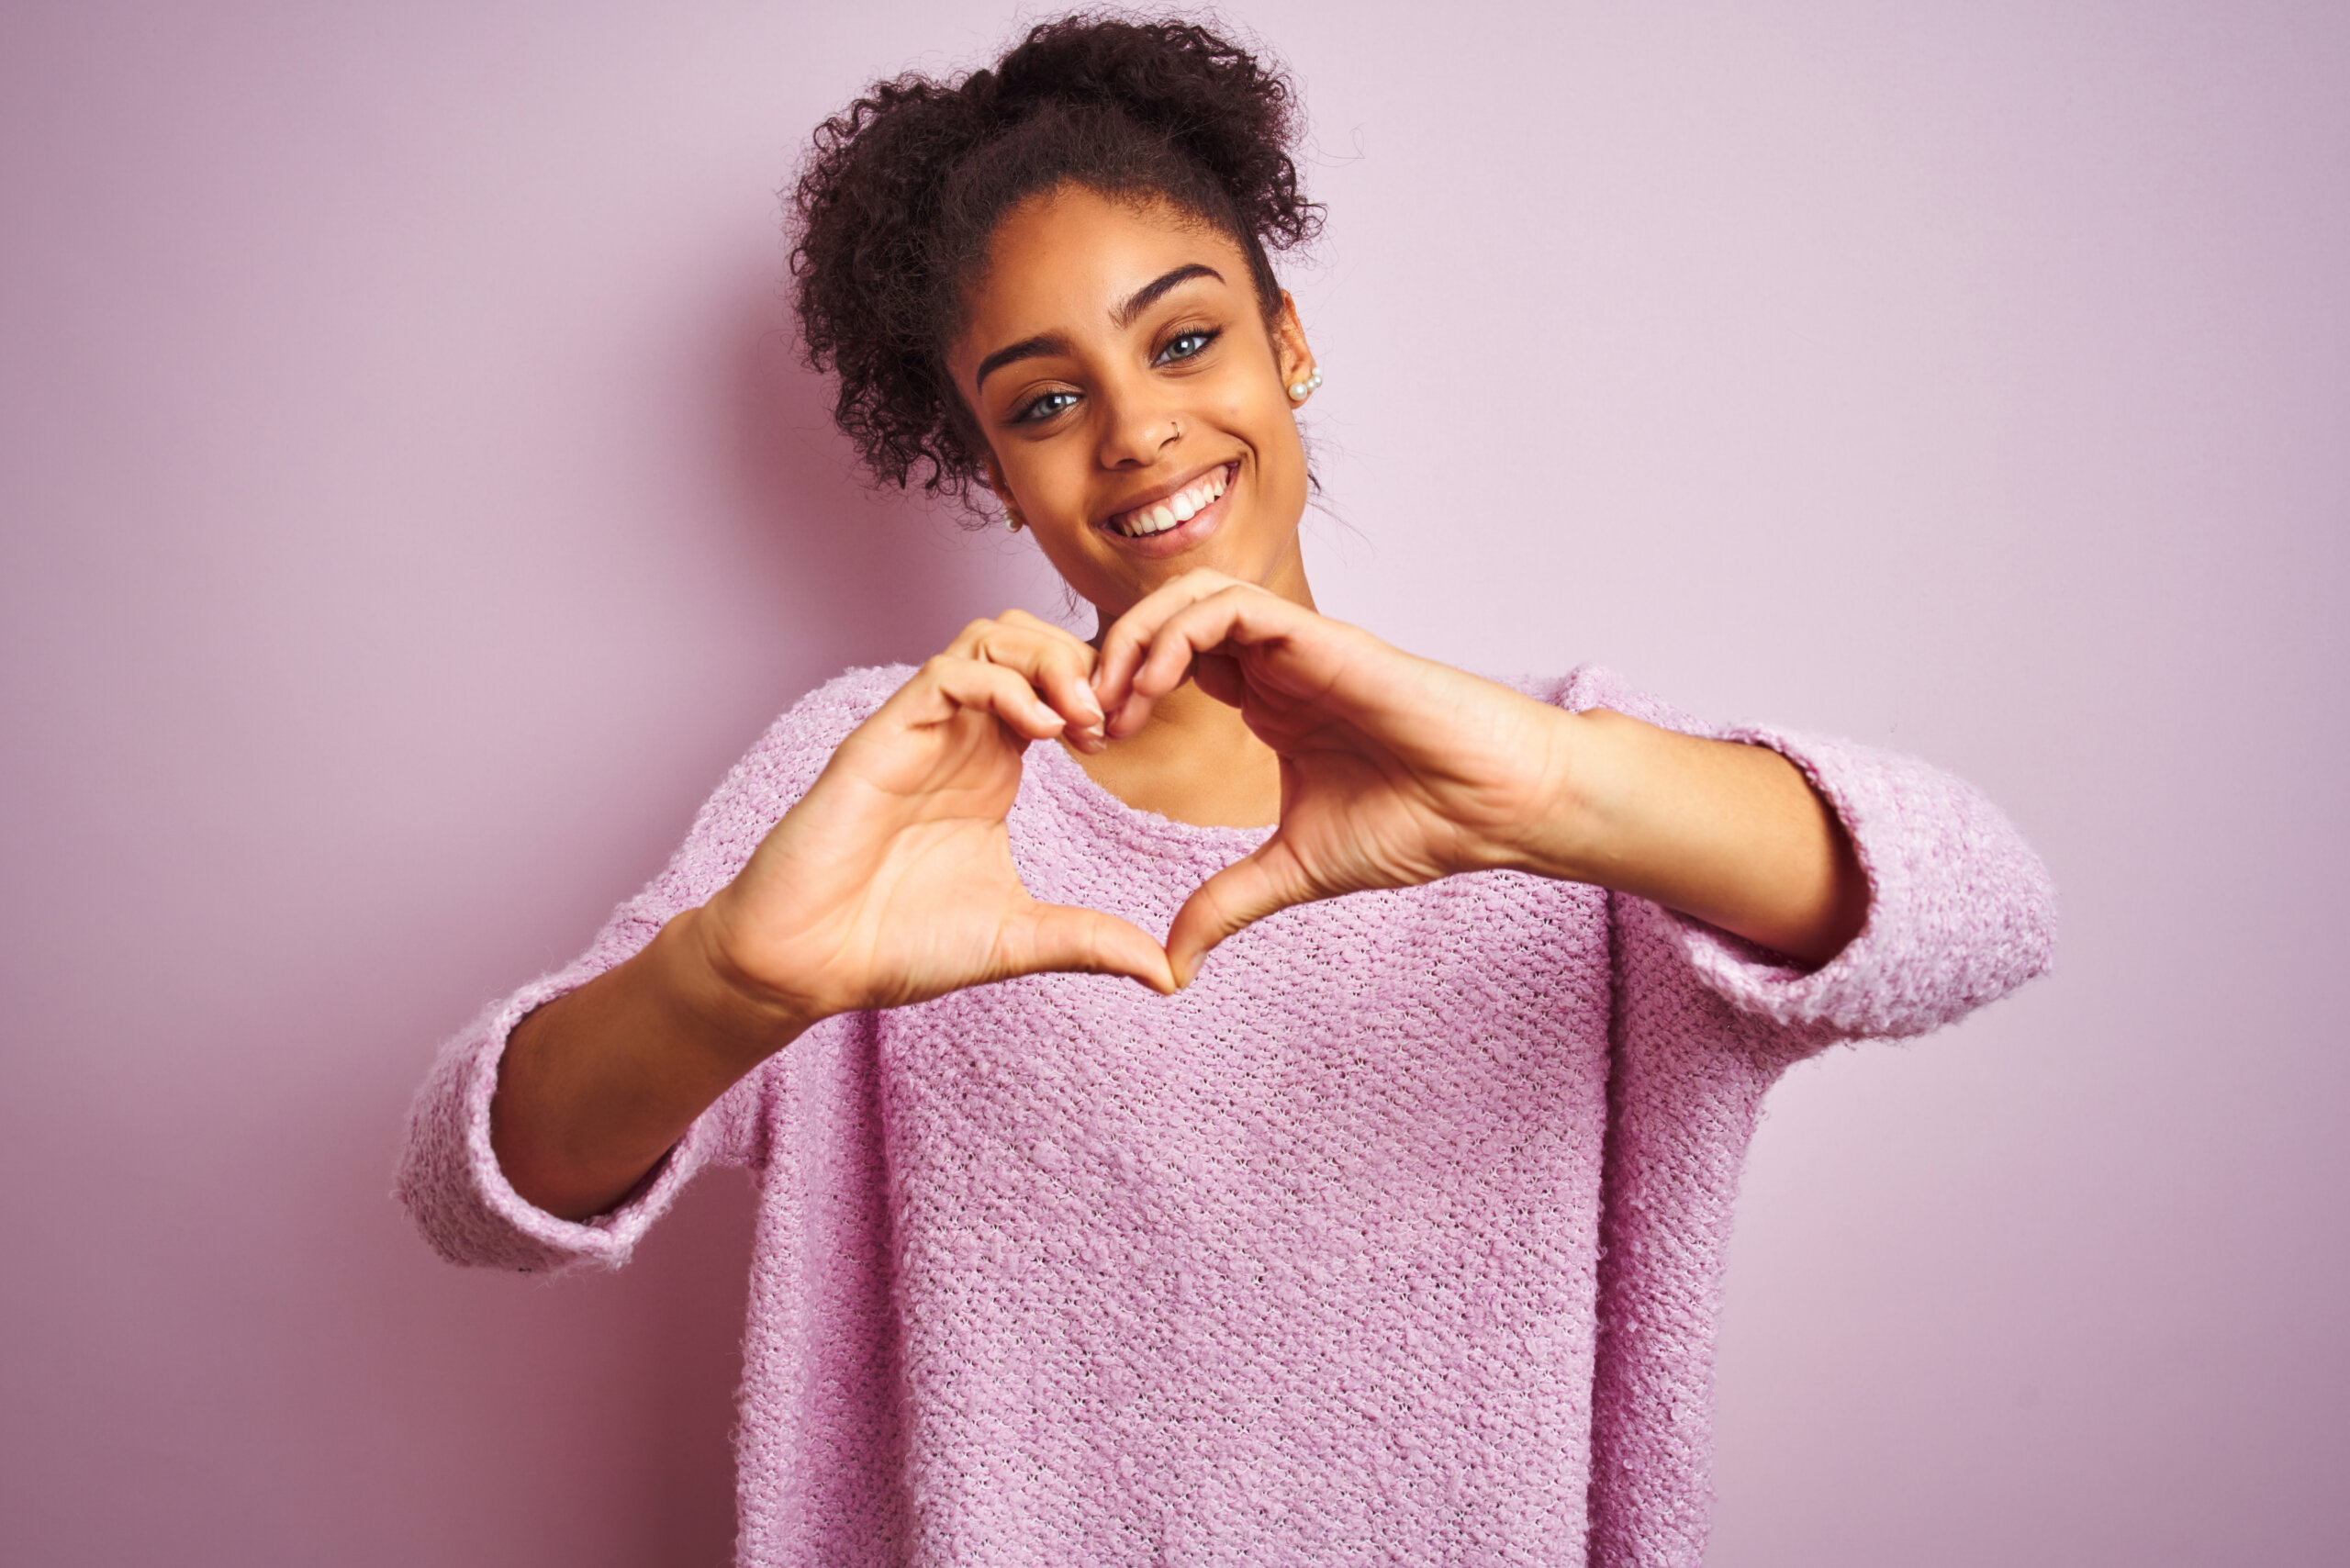 Young Black woman wearing a pink Winter sweater standing in front of a pink background making a heart with her hands